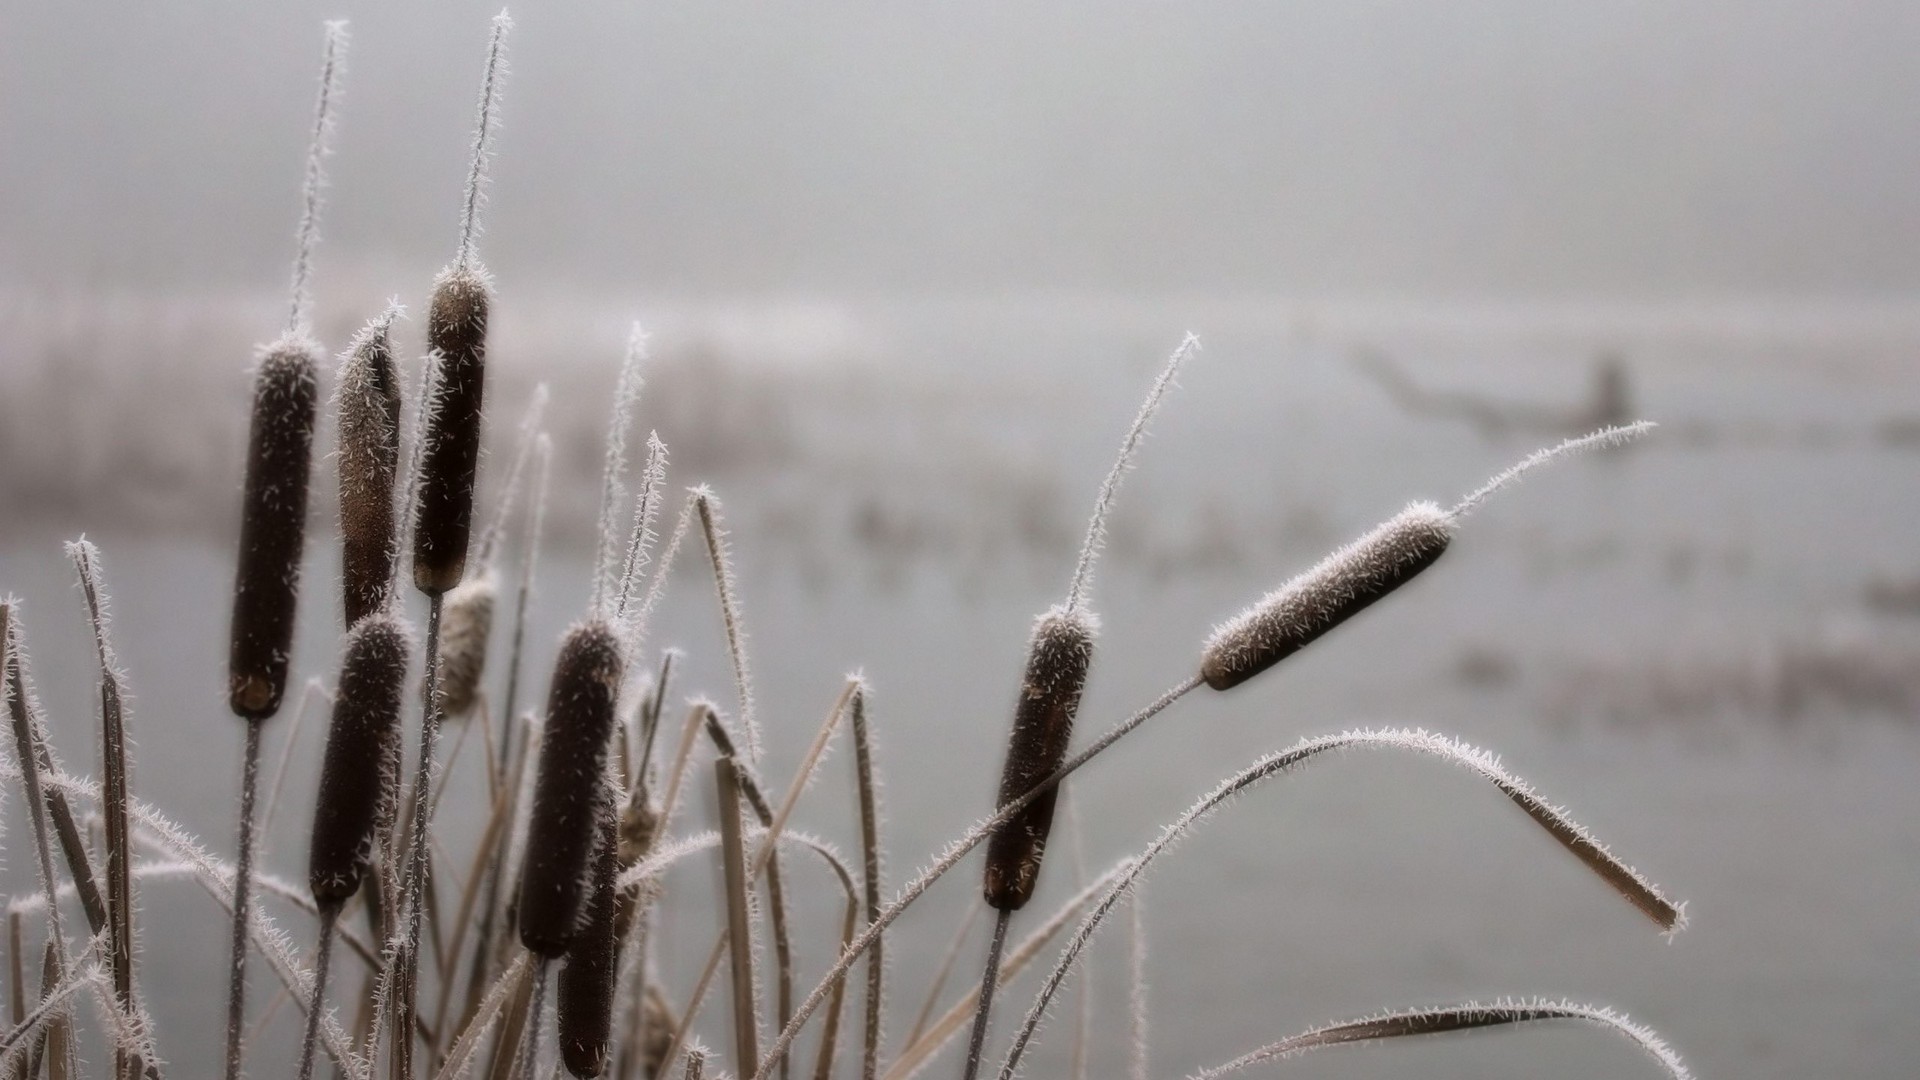 1920x1080 wallpapers: reeds, hoarfrost, frost, november (image)